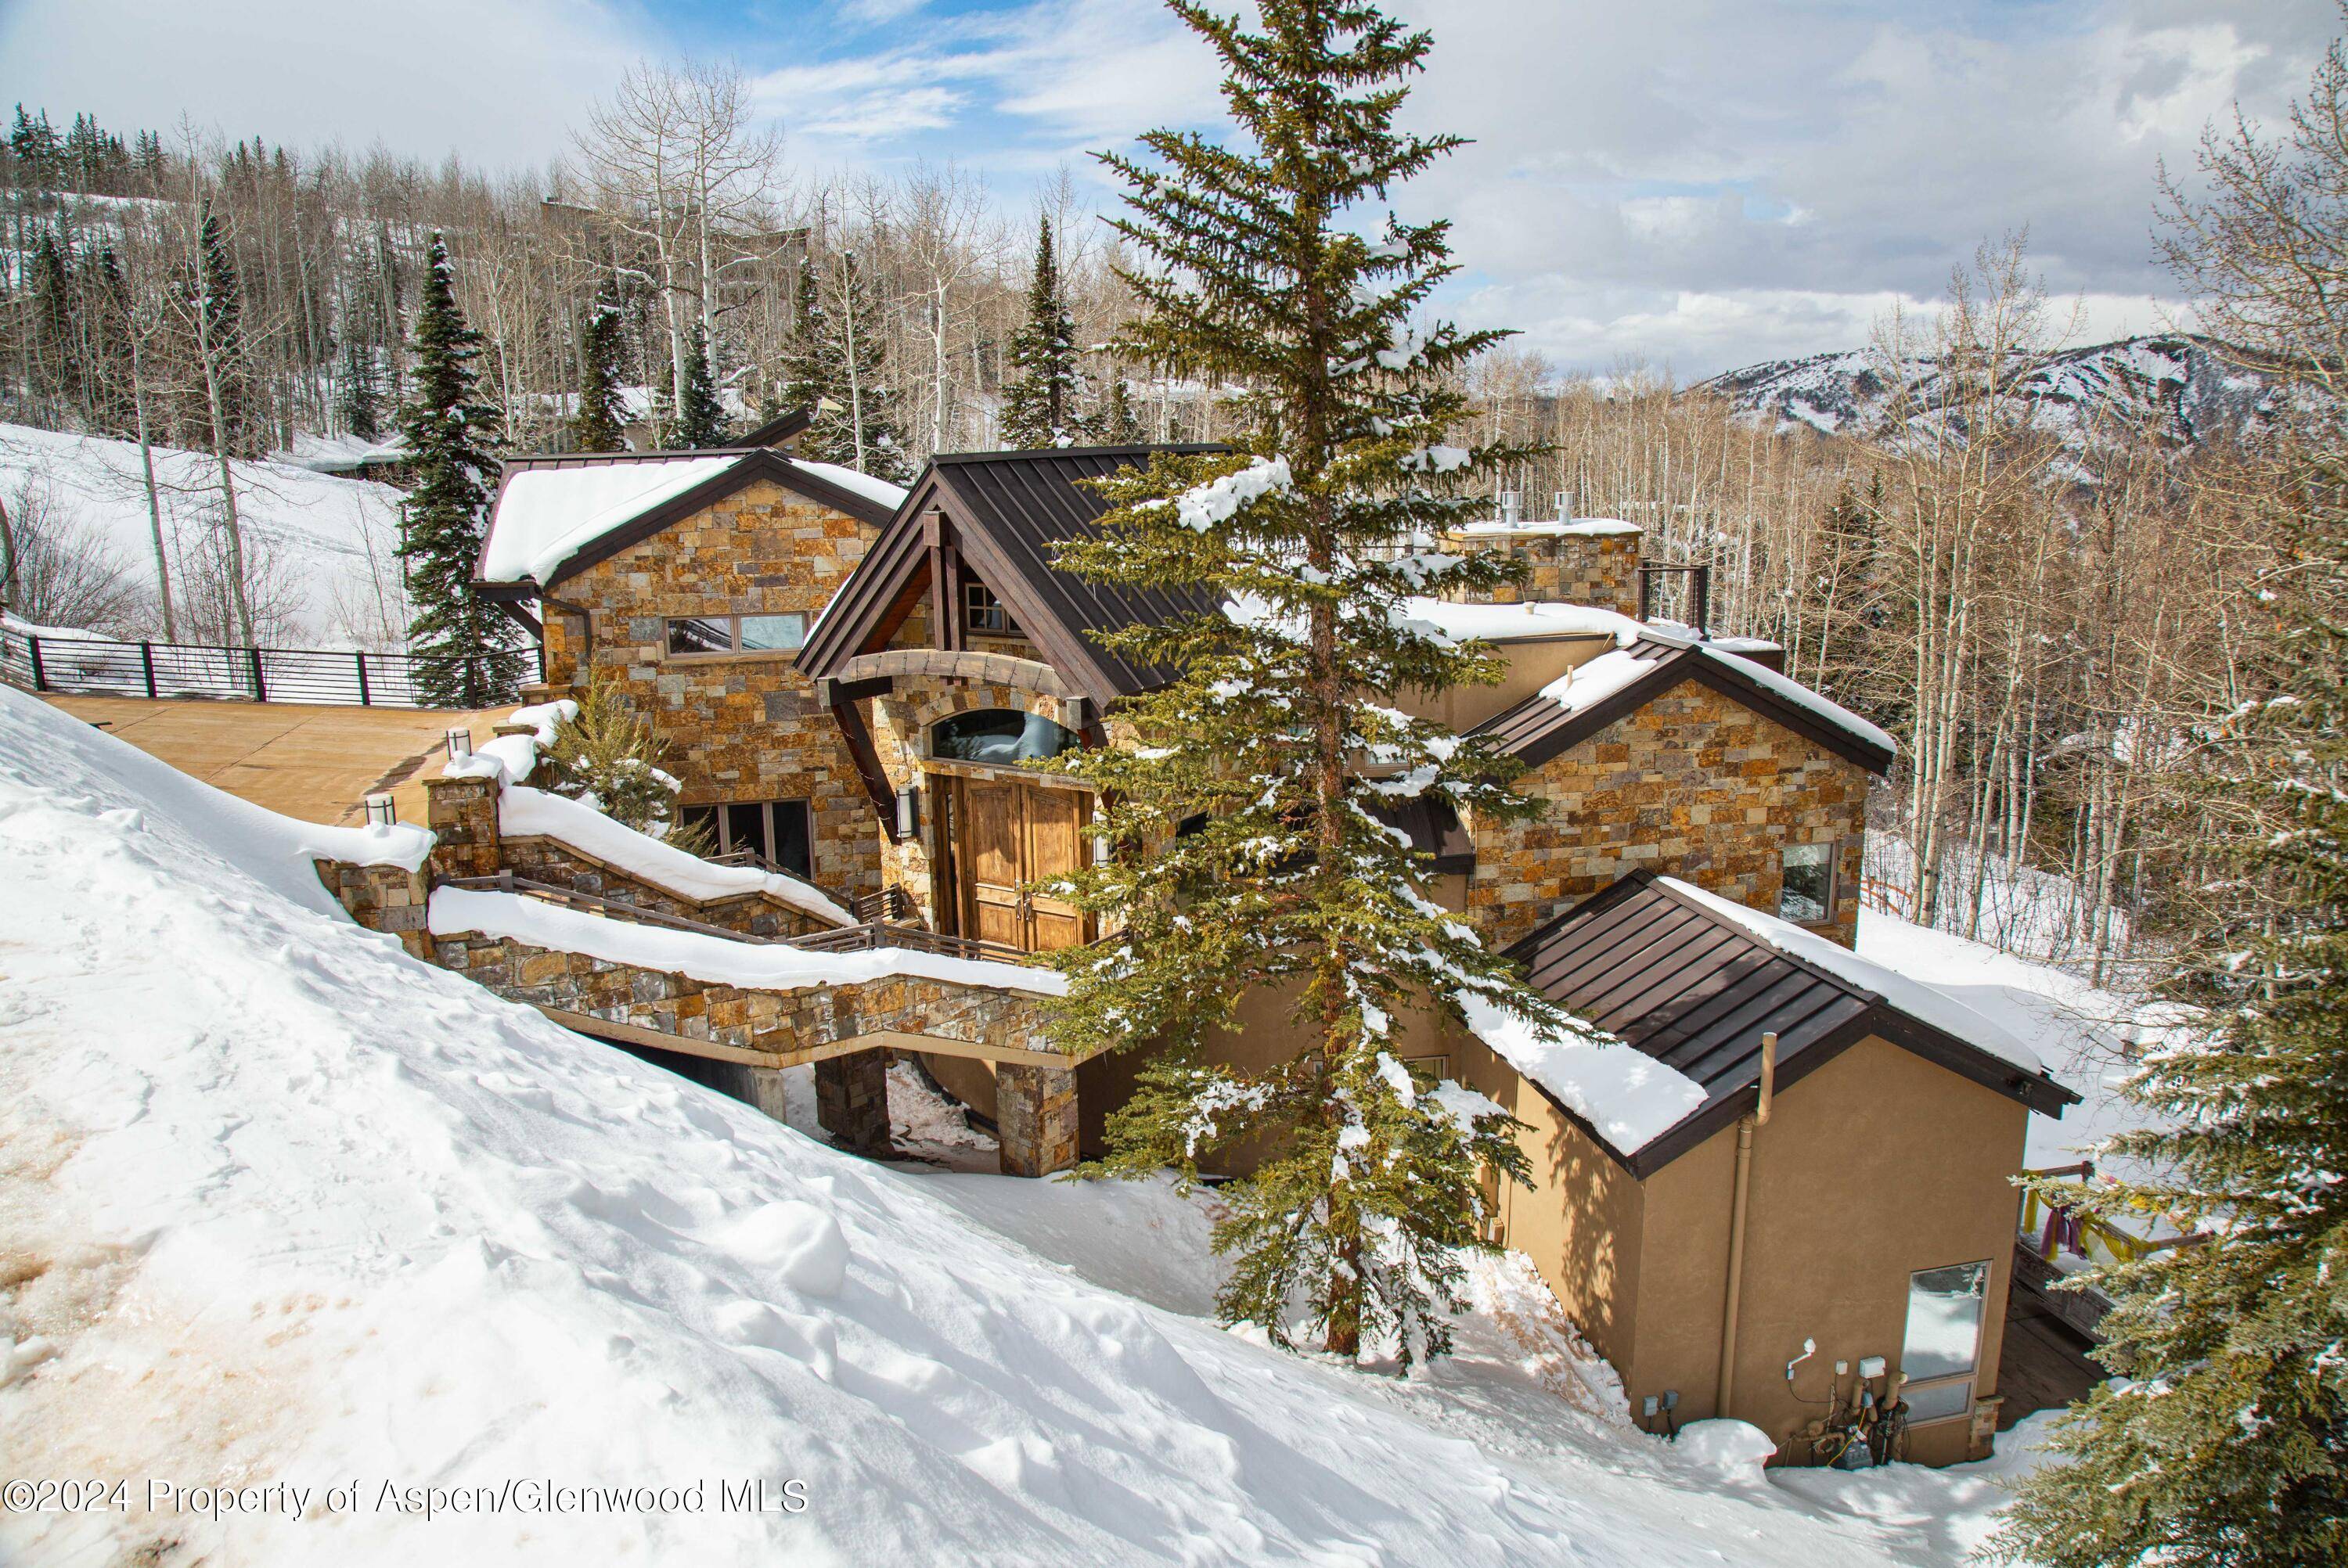 This house is the perfect gateway to your mountain vacation as it directly accesses Adams Avenue, the main ski run of the Snowmass Ski area.